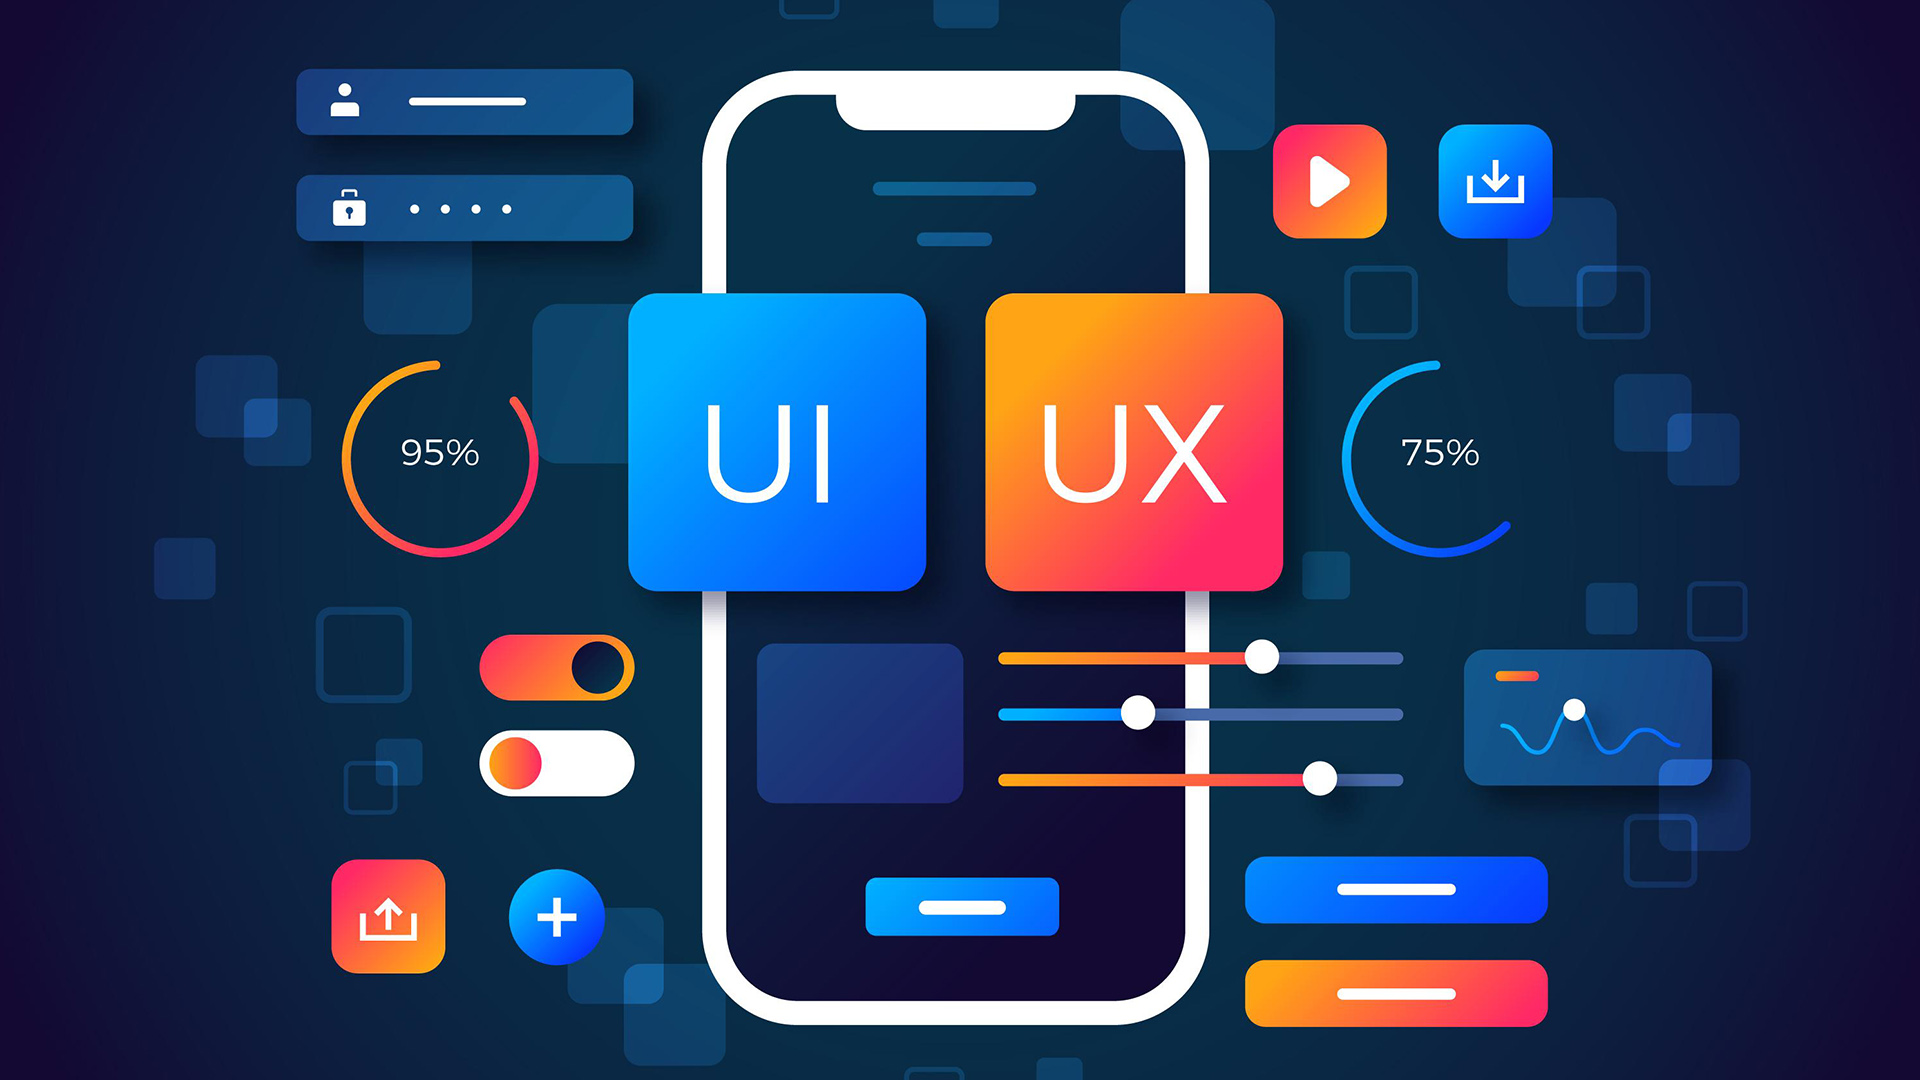 What is the difference between UI and UX